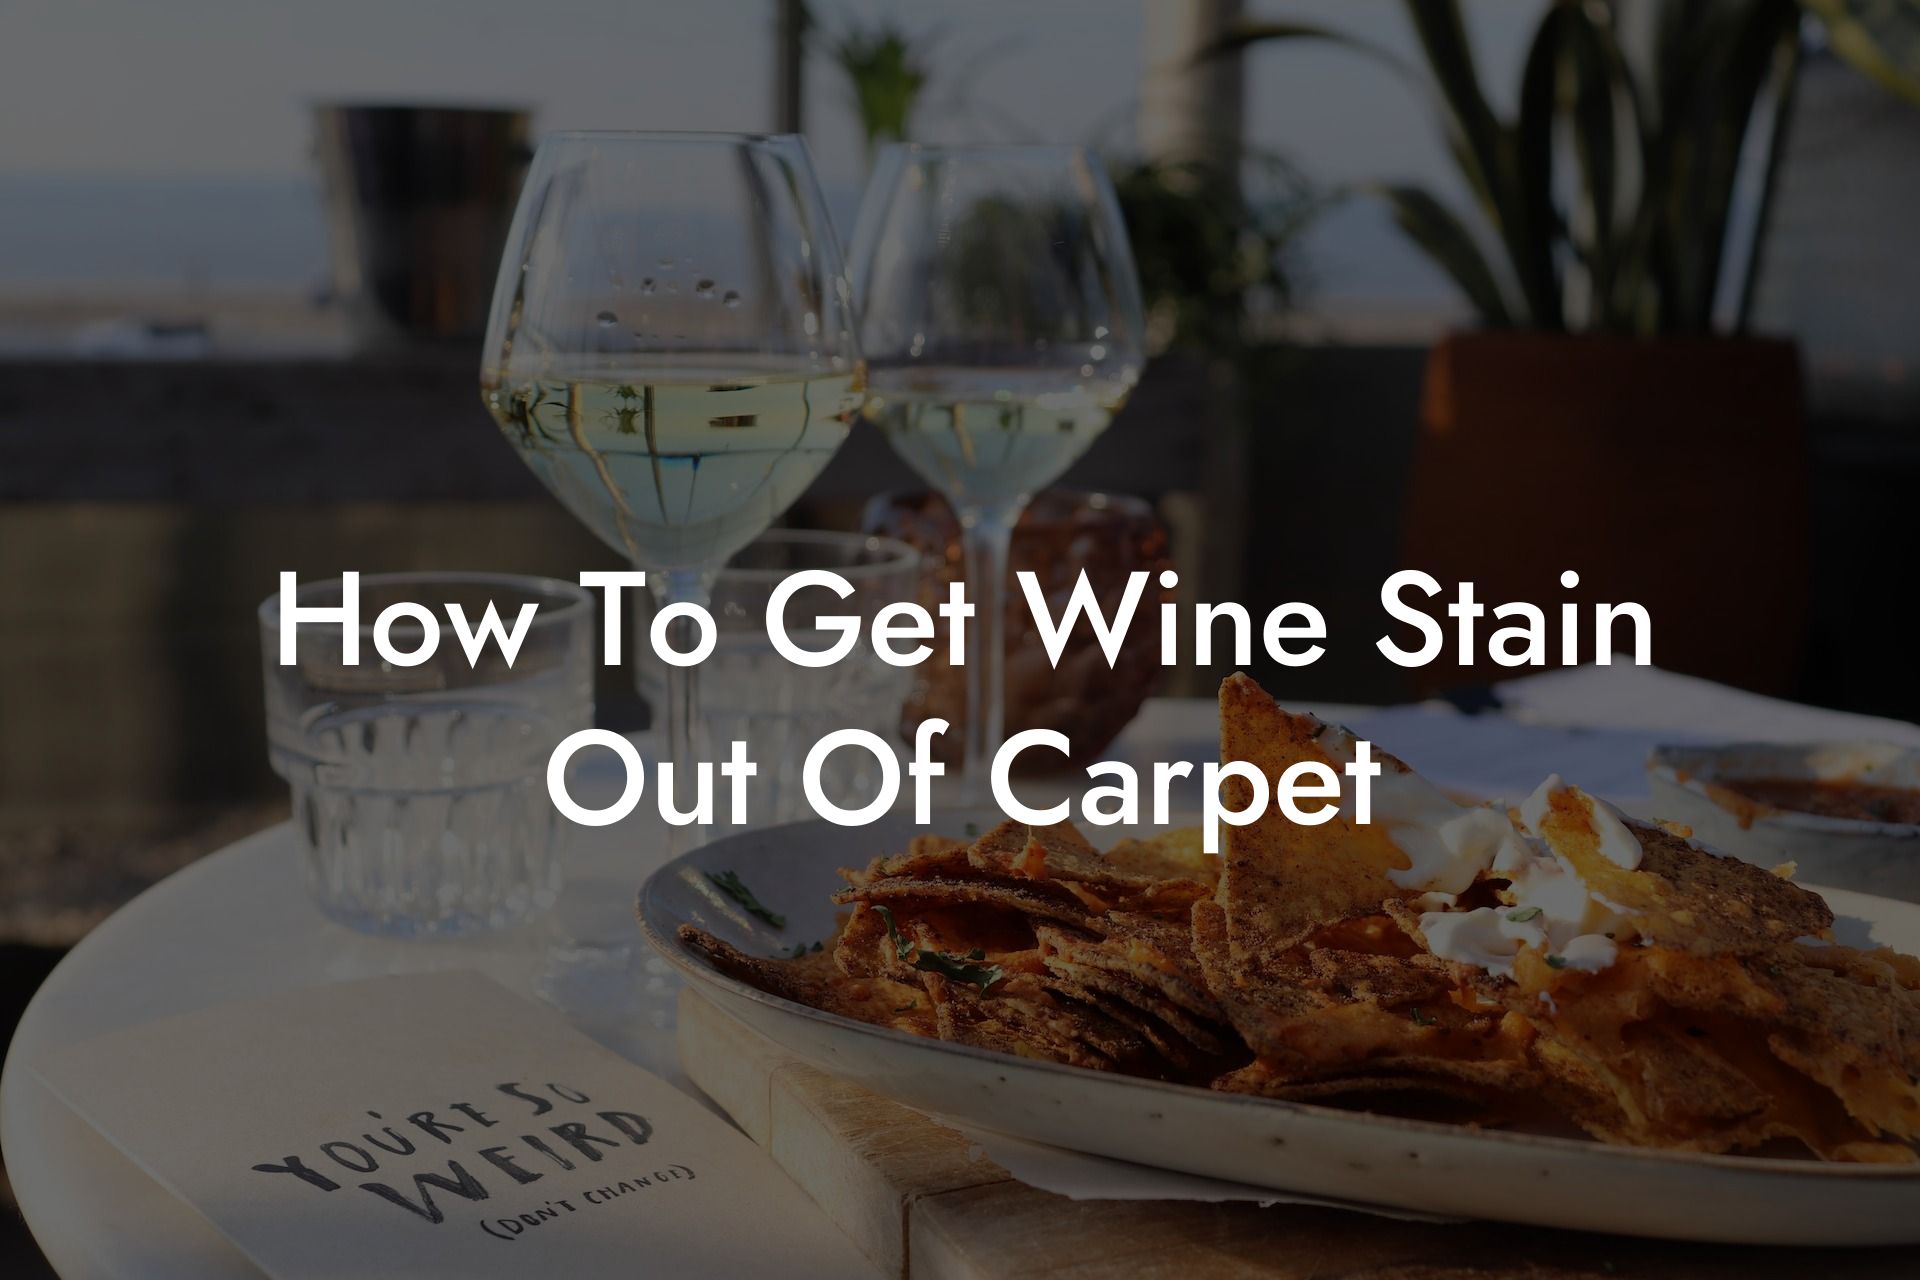 How To Get Wine Stain Out Of Carpet